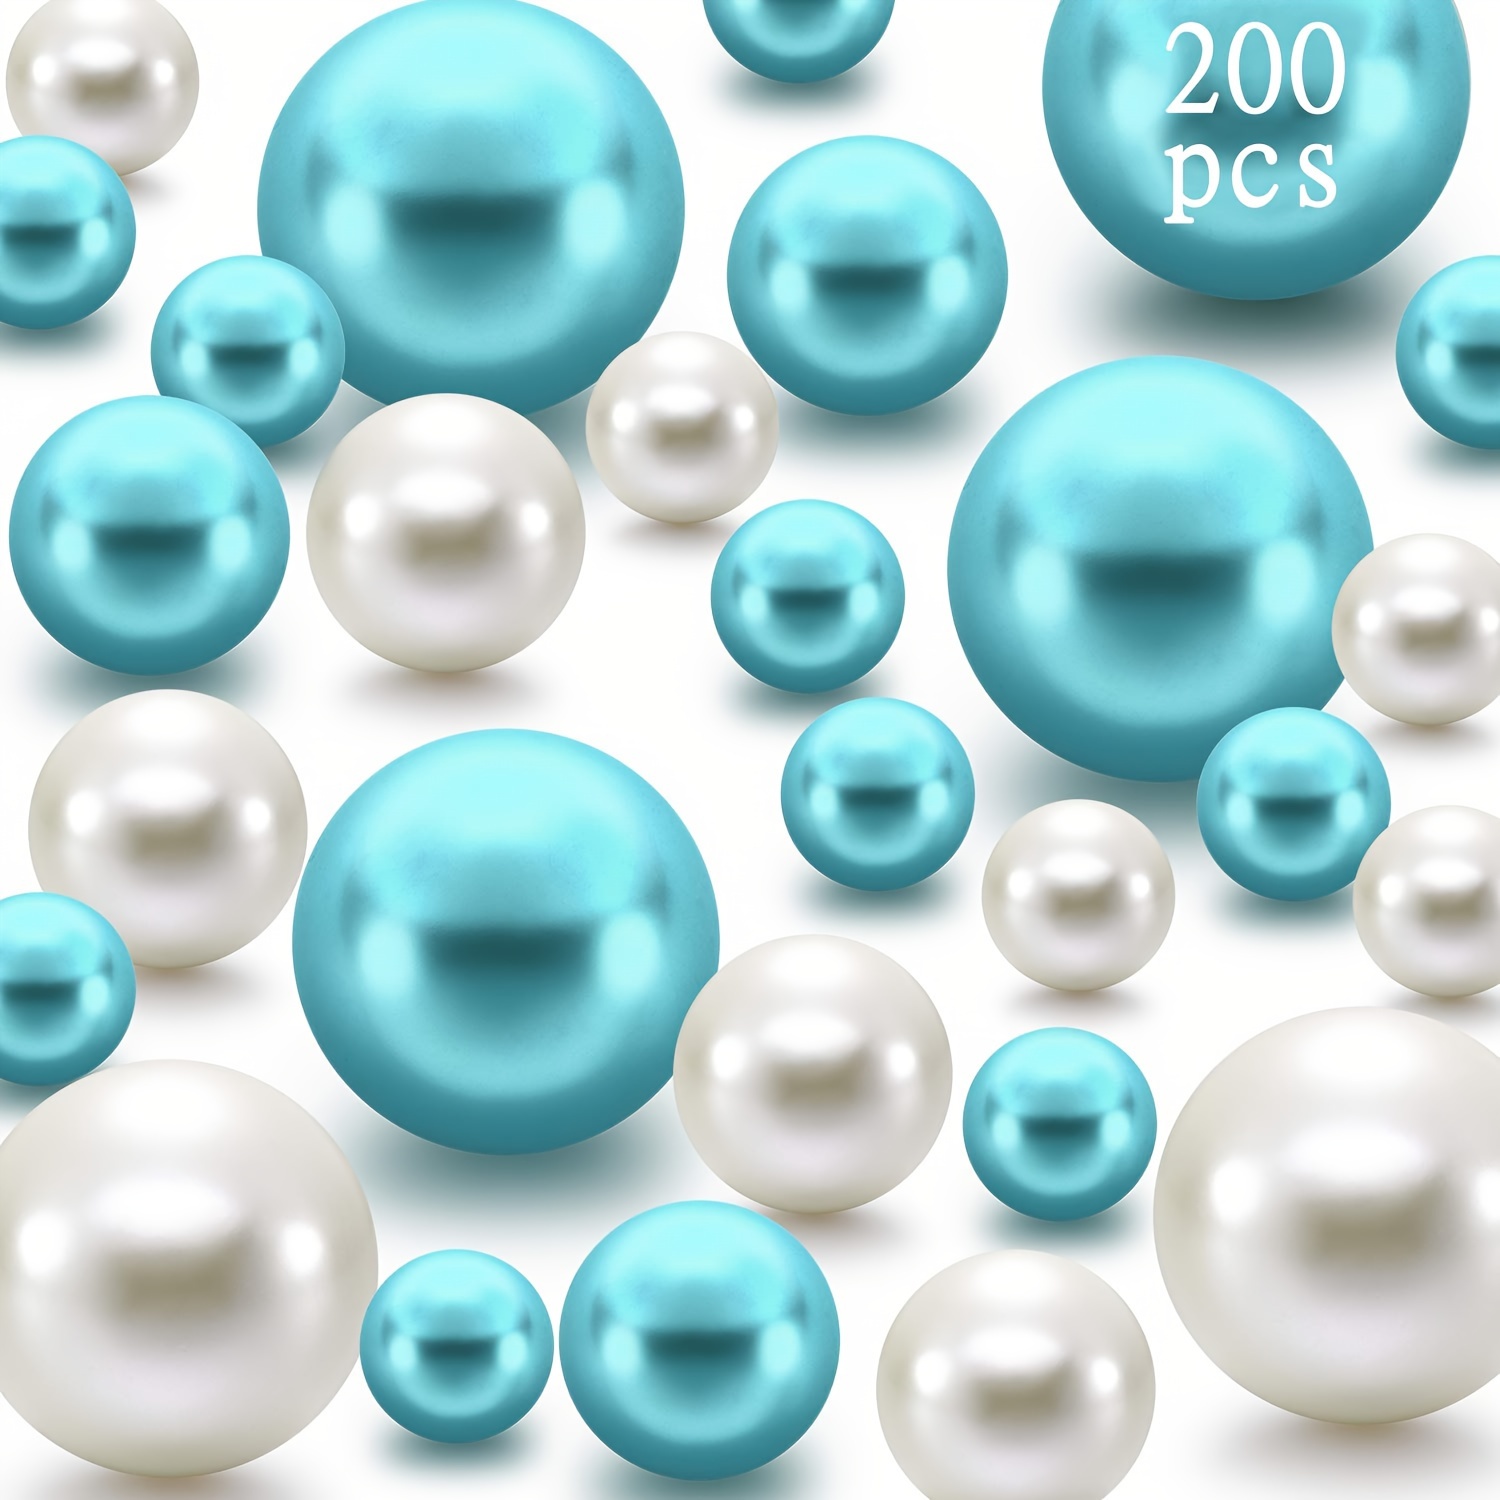 

200pcs Faux Pearl For Vase Filler Pearl Bead Vase Centerpieces Bead For Brush Holder Assorted Round Faux Bead For Home Wedding Table Decor, 10/20 Mm (creamy White, Turquoise)